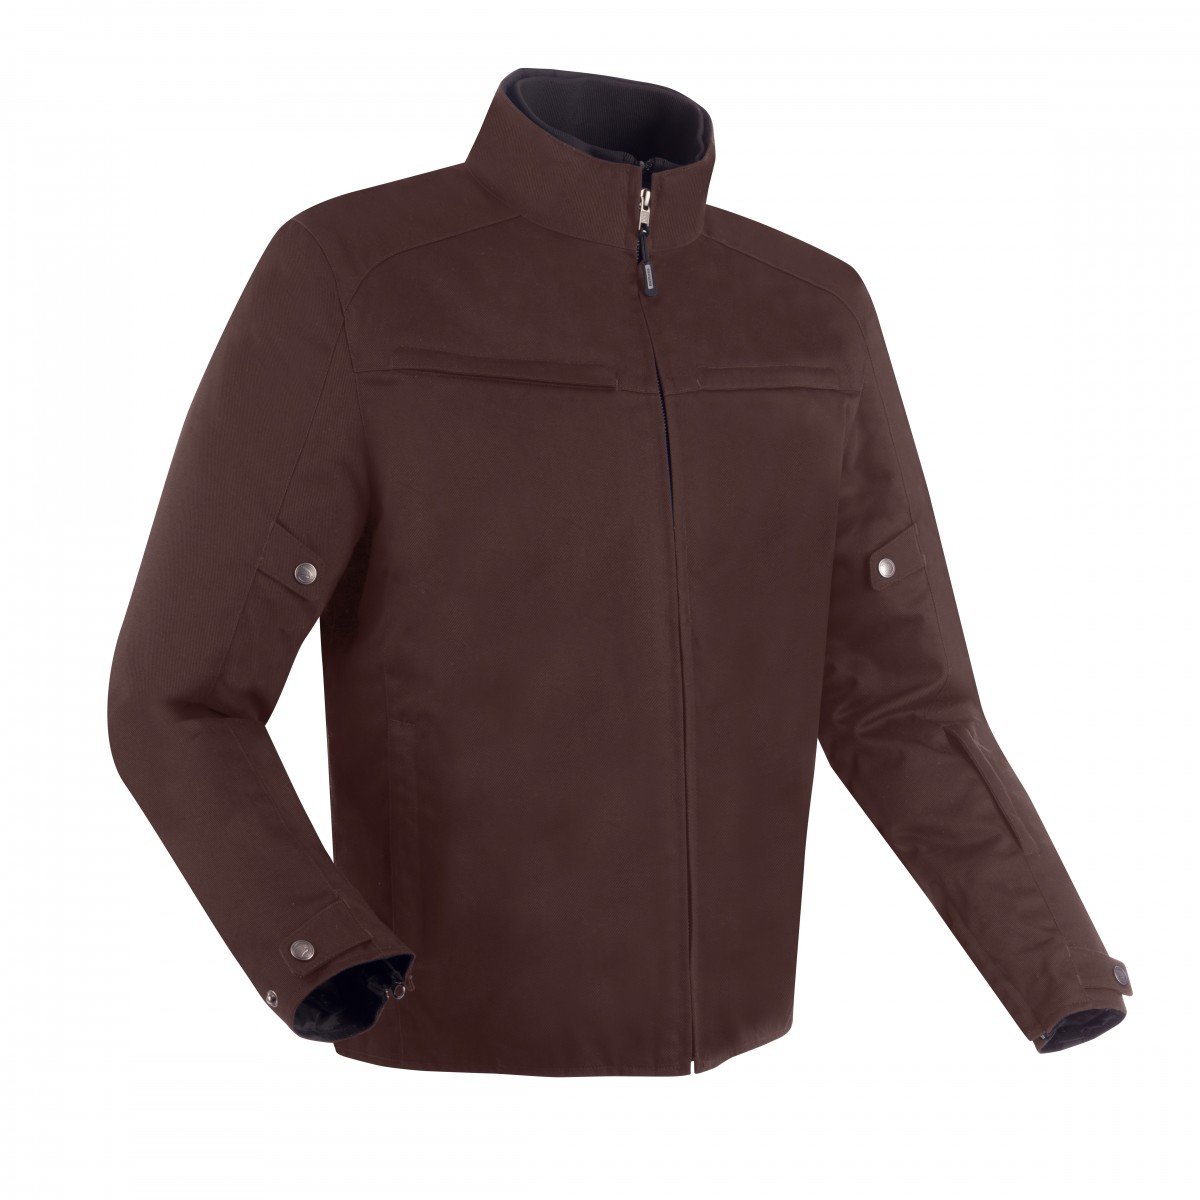 Image of Bering Cruiser Jacket Brown Size L ID 3660815169254